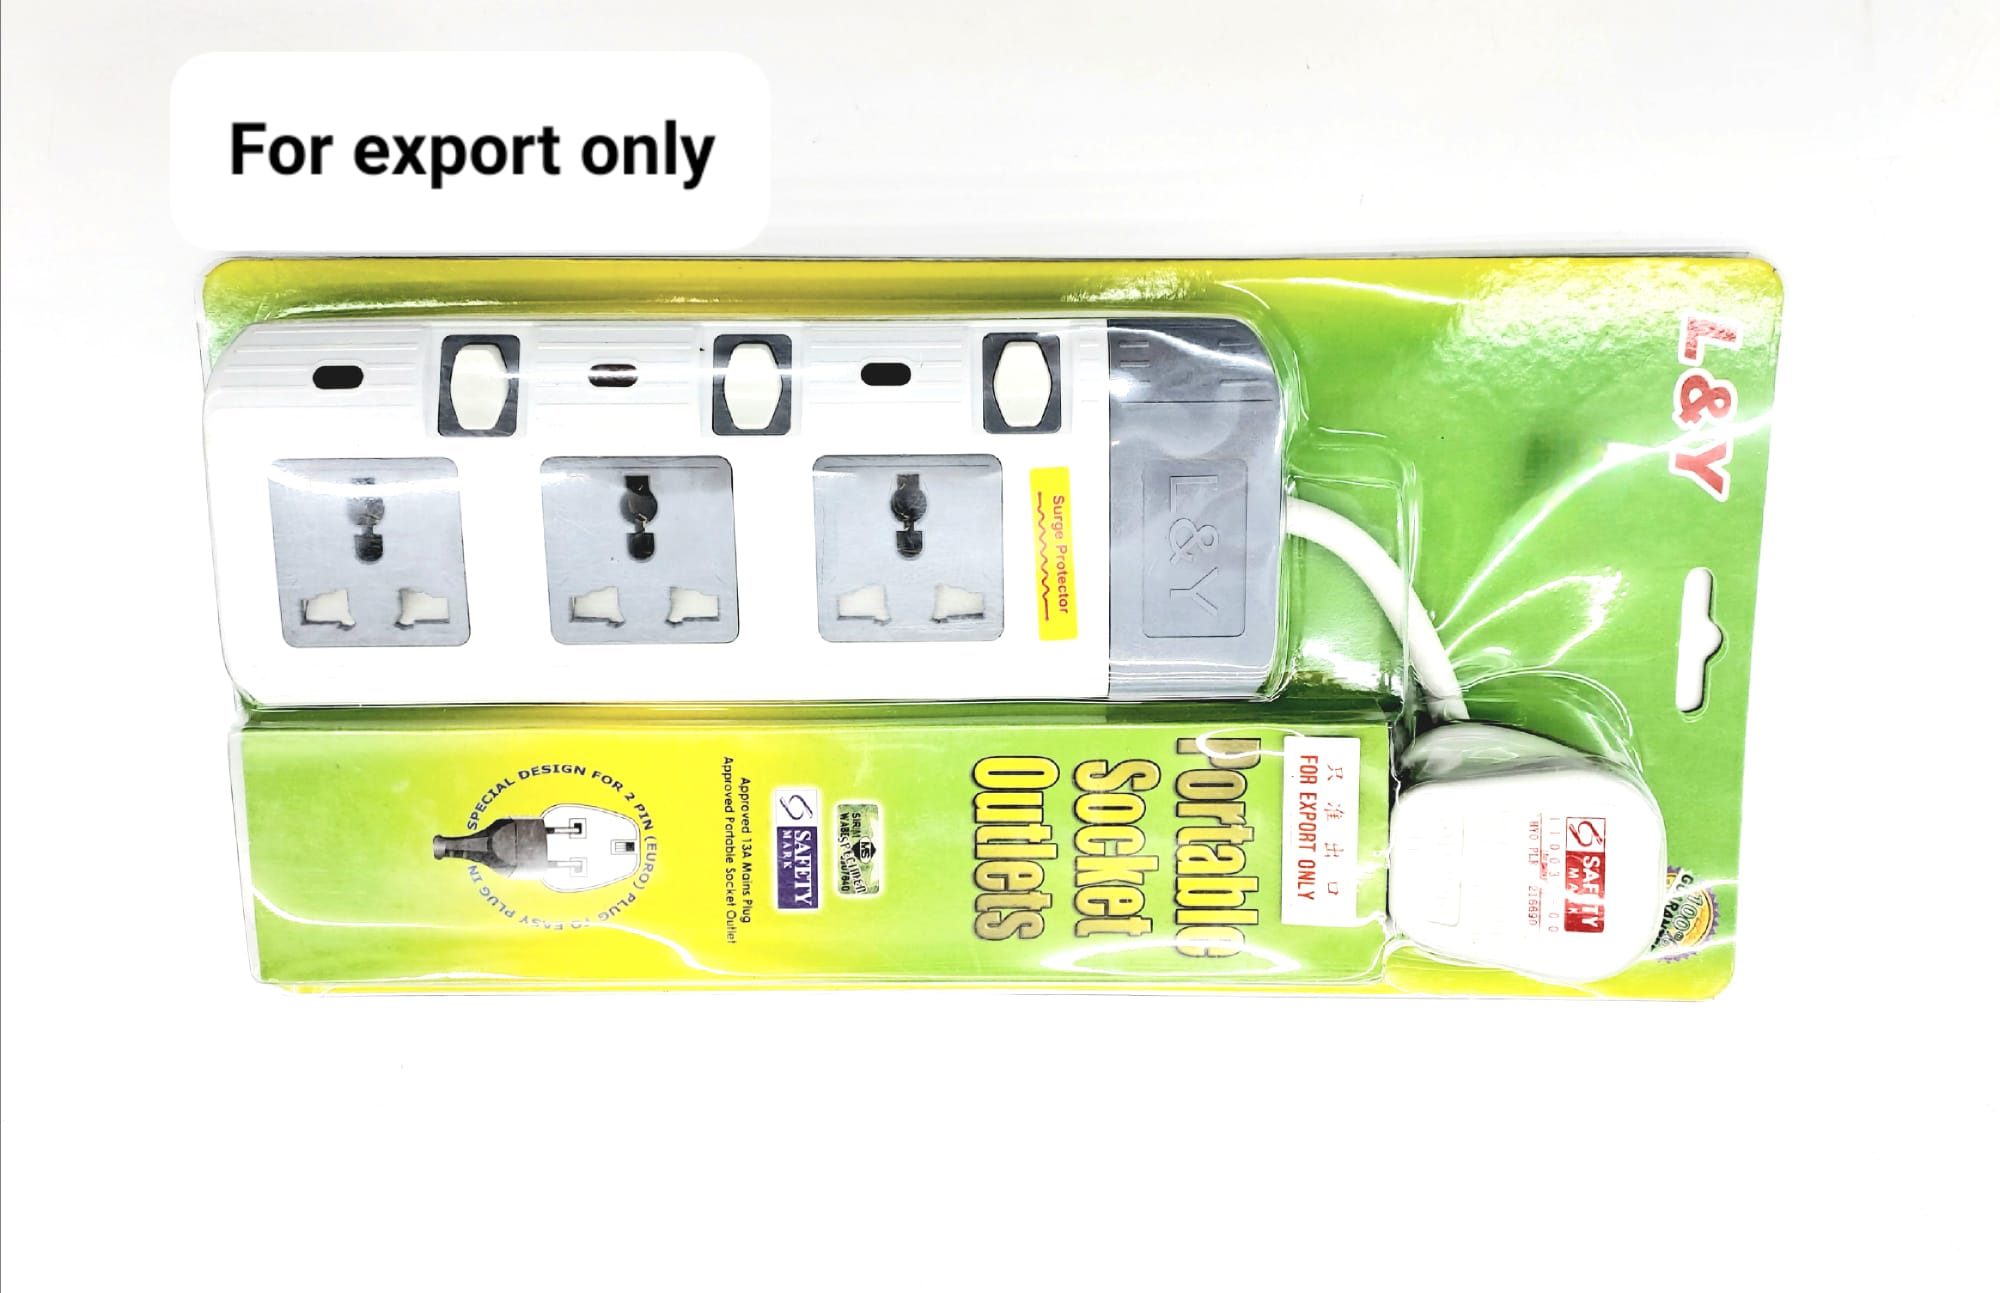 L&Y 3 Way 3pin Multi Socket Outlet (for export only) 